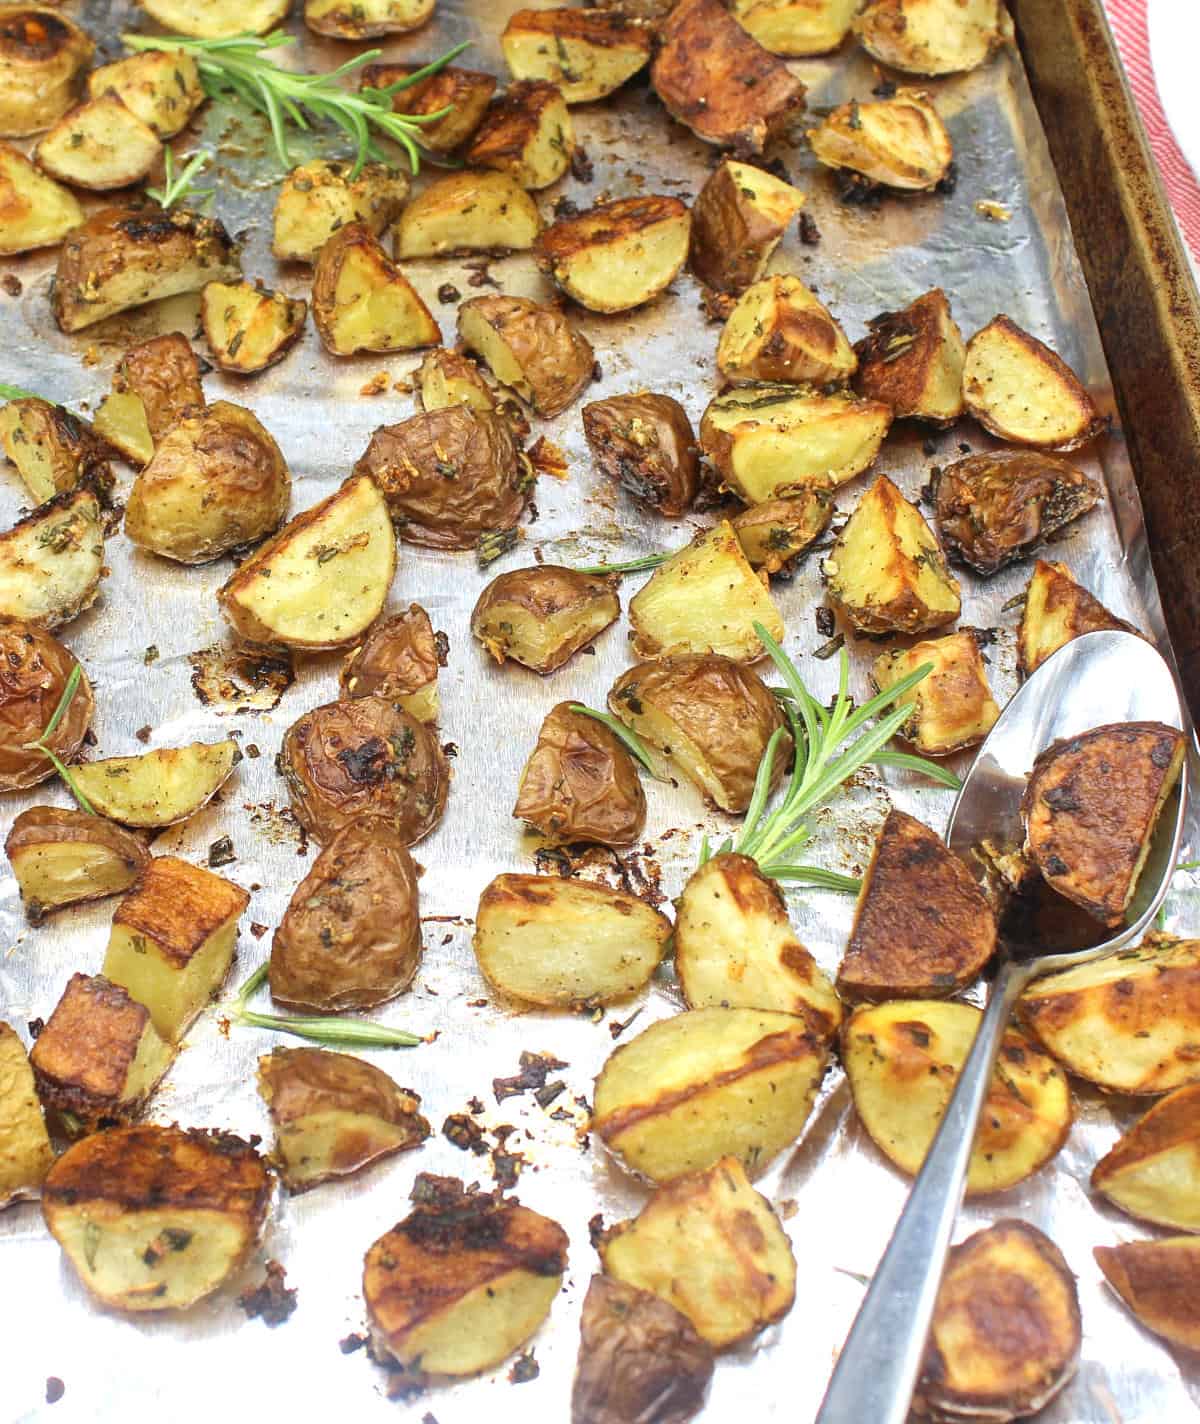 Rosemary roasted potatoes on baking sheet lined with aluminum foil.